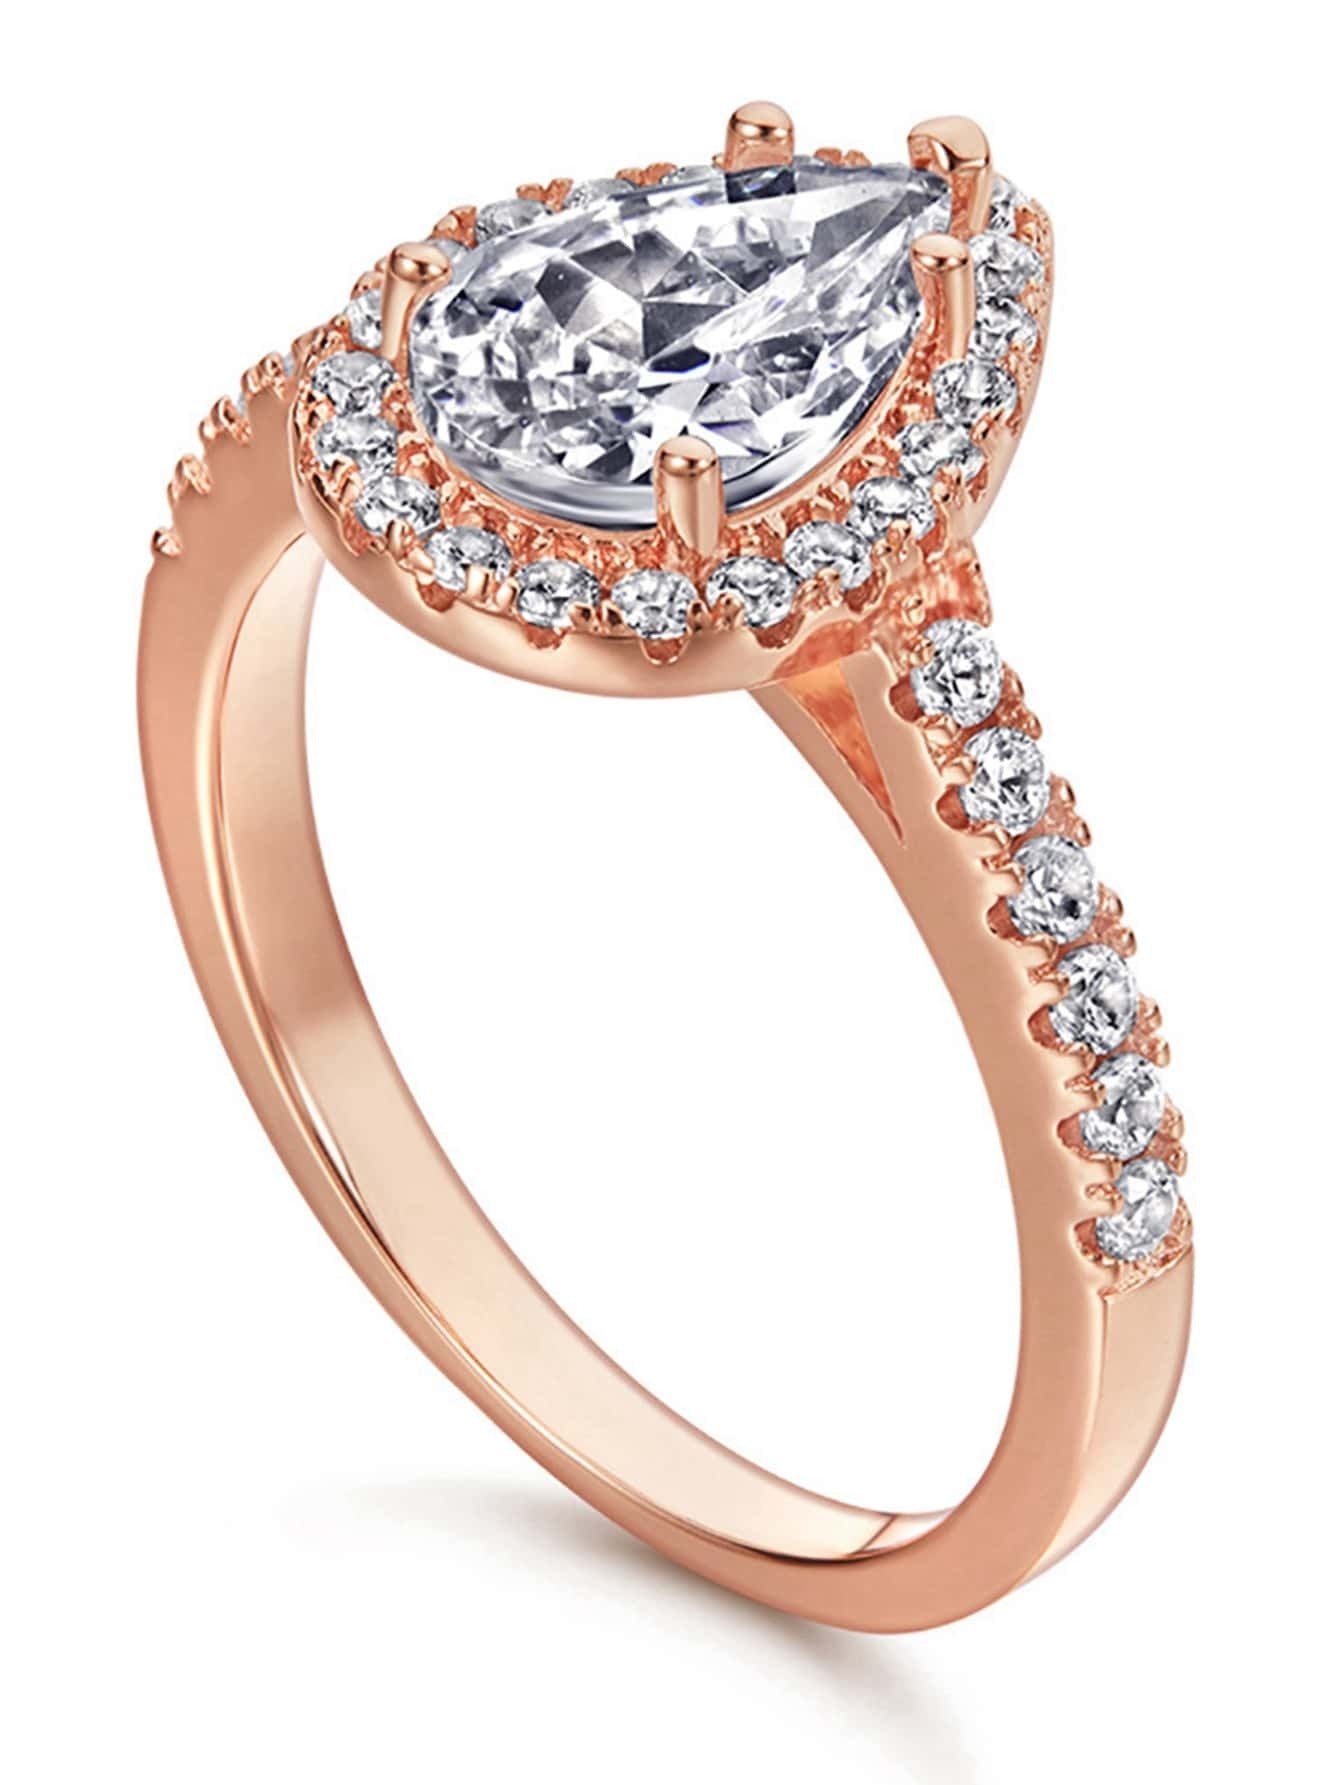 CM-AR892492 Classic 925 Sterling Silver Pear Cut Cubic Zirconia Cocktail Ring - Rose Gold